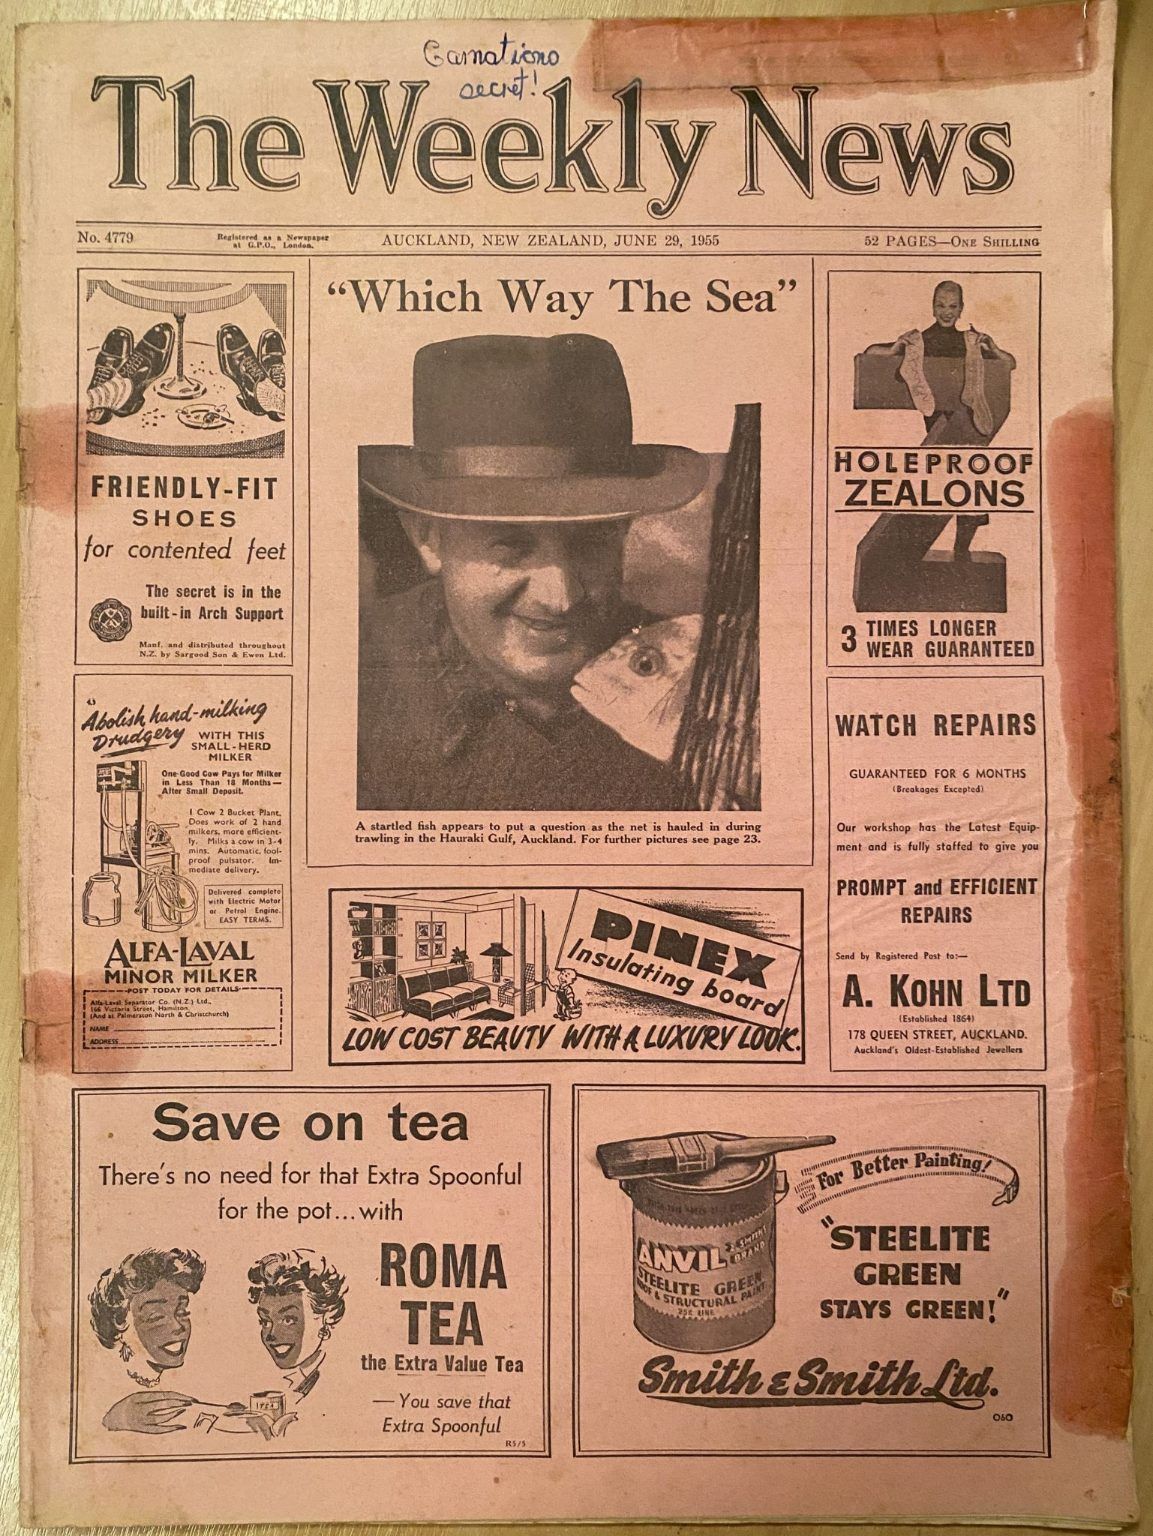 OLD NEWSPAPER: The Weekly News - No. 4779, 29 June 1955